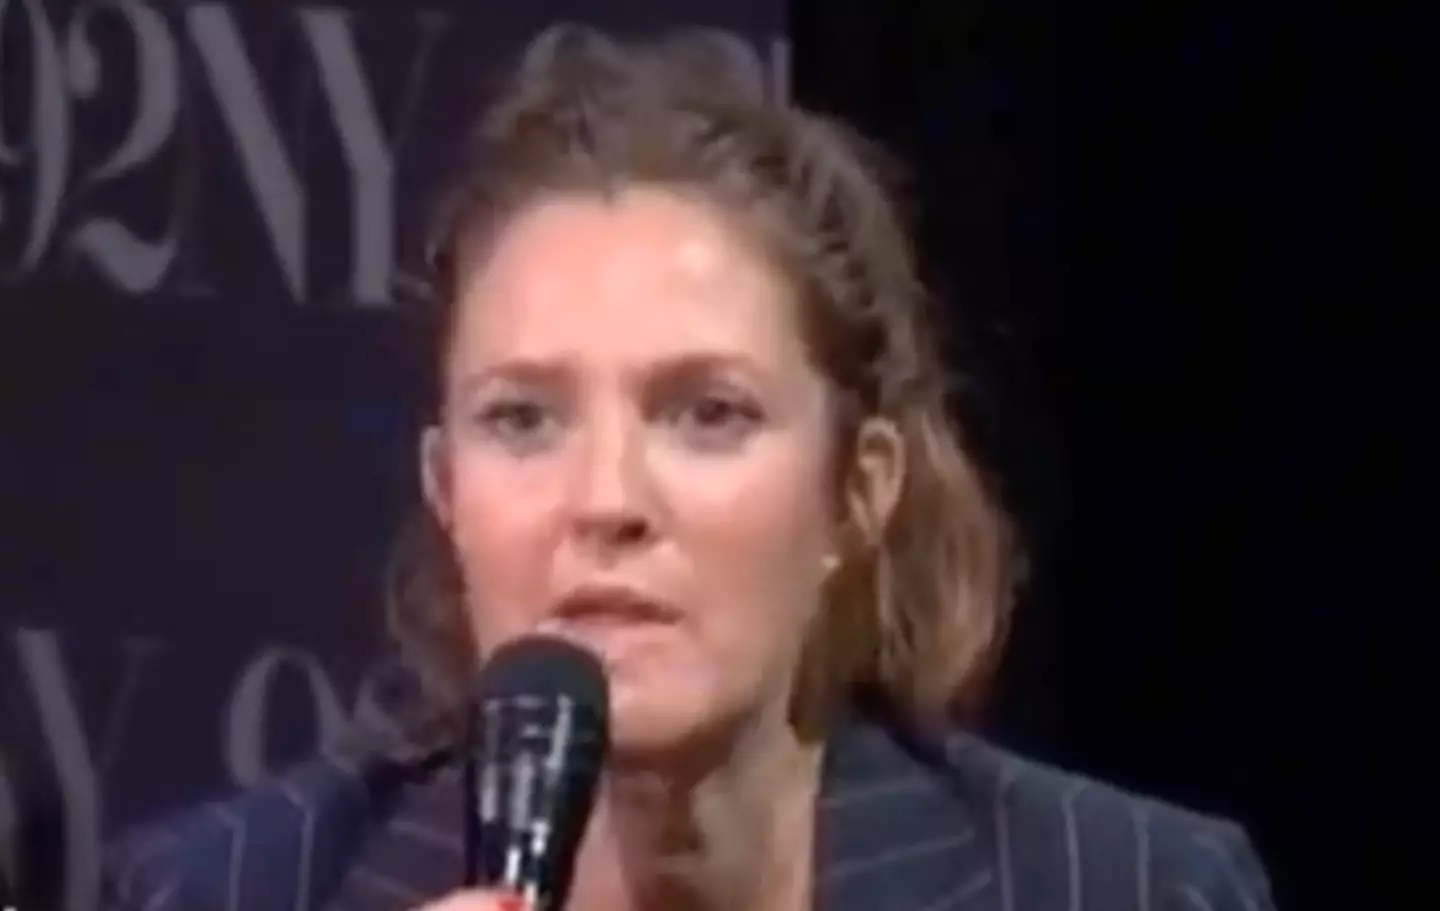 Drew Barrymore was left shocked by the interruption.